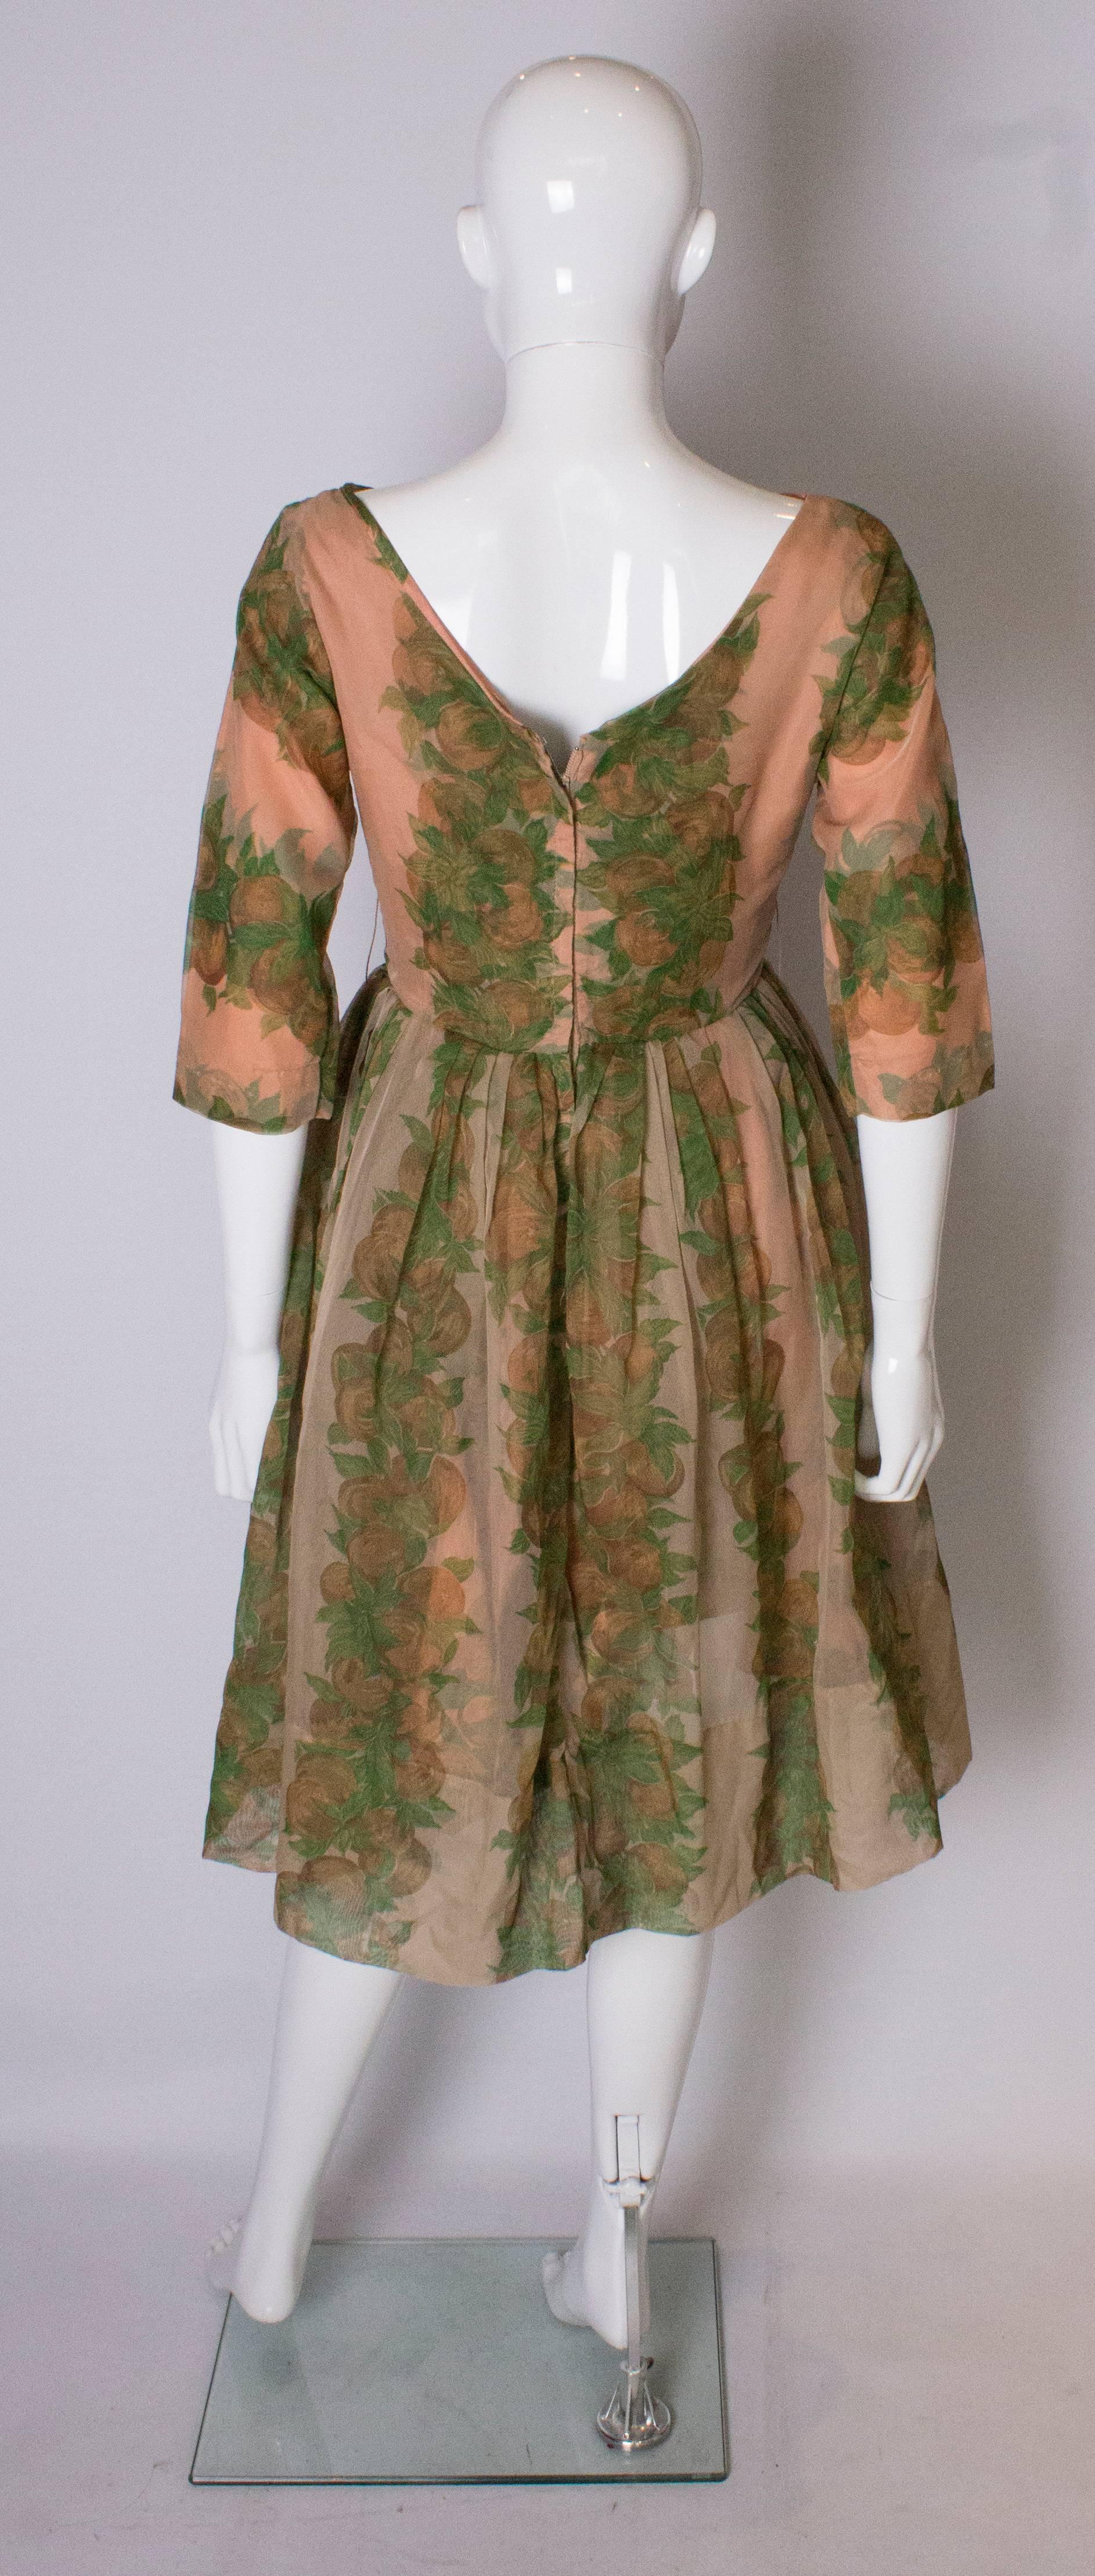 A Vintage 1950s Apricot, Green and Brown print swing cinch party dress 3